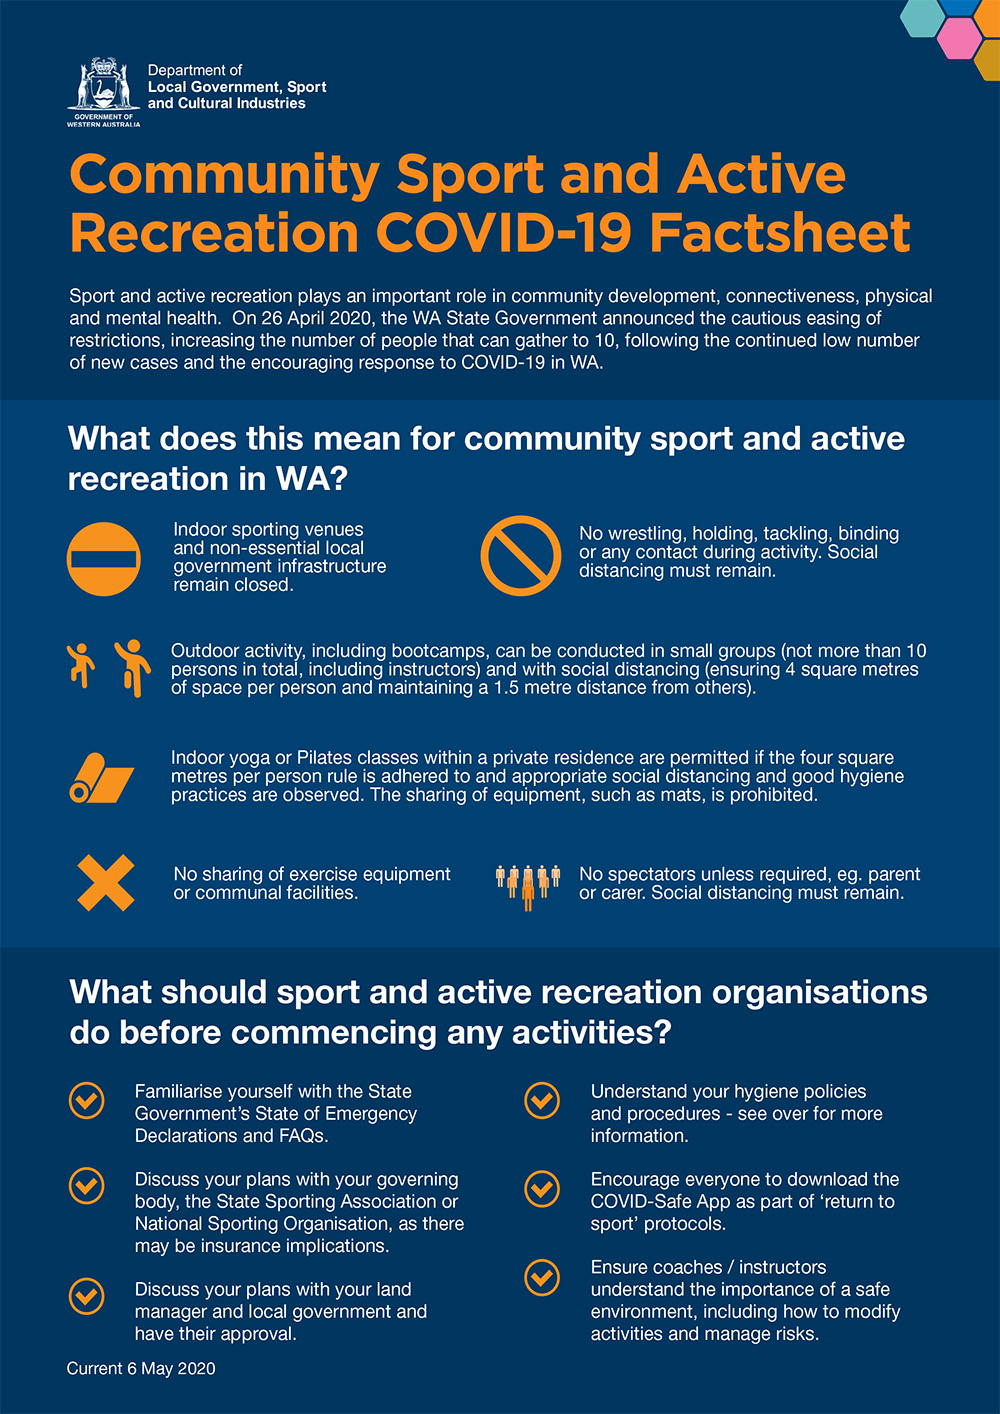 Community Sport and Active Recreation COVID-19 Factsheet_6 May2020-1